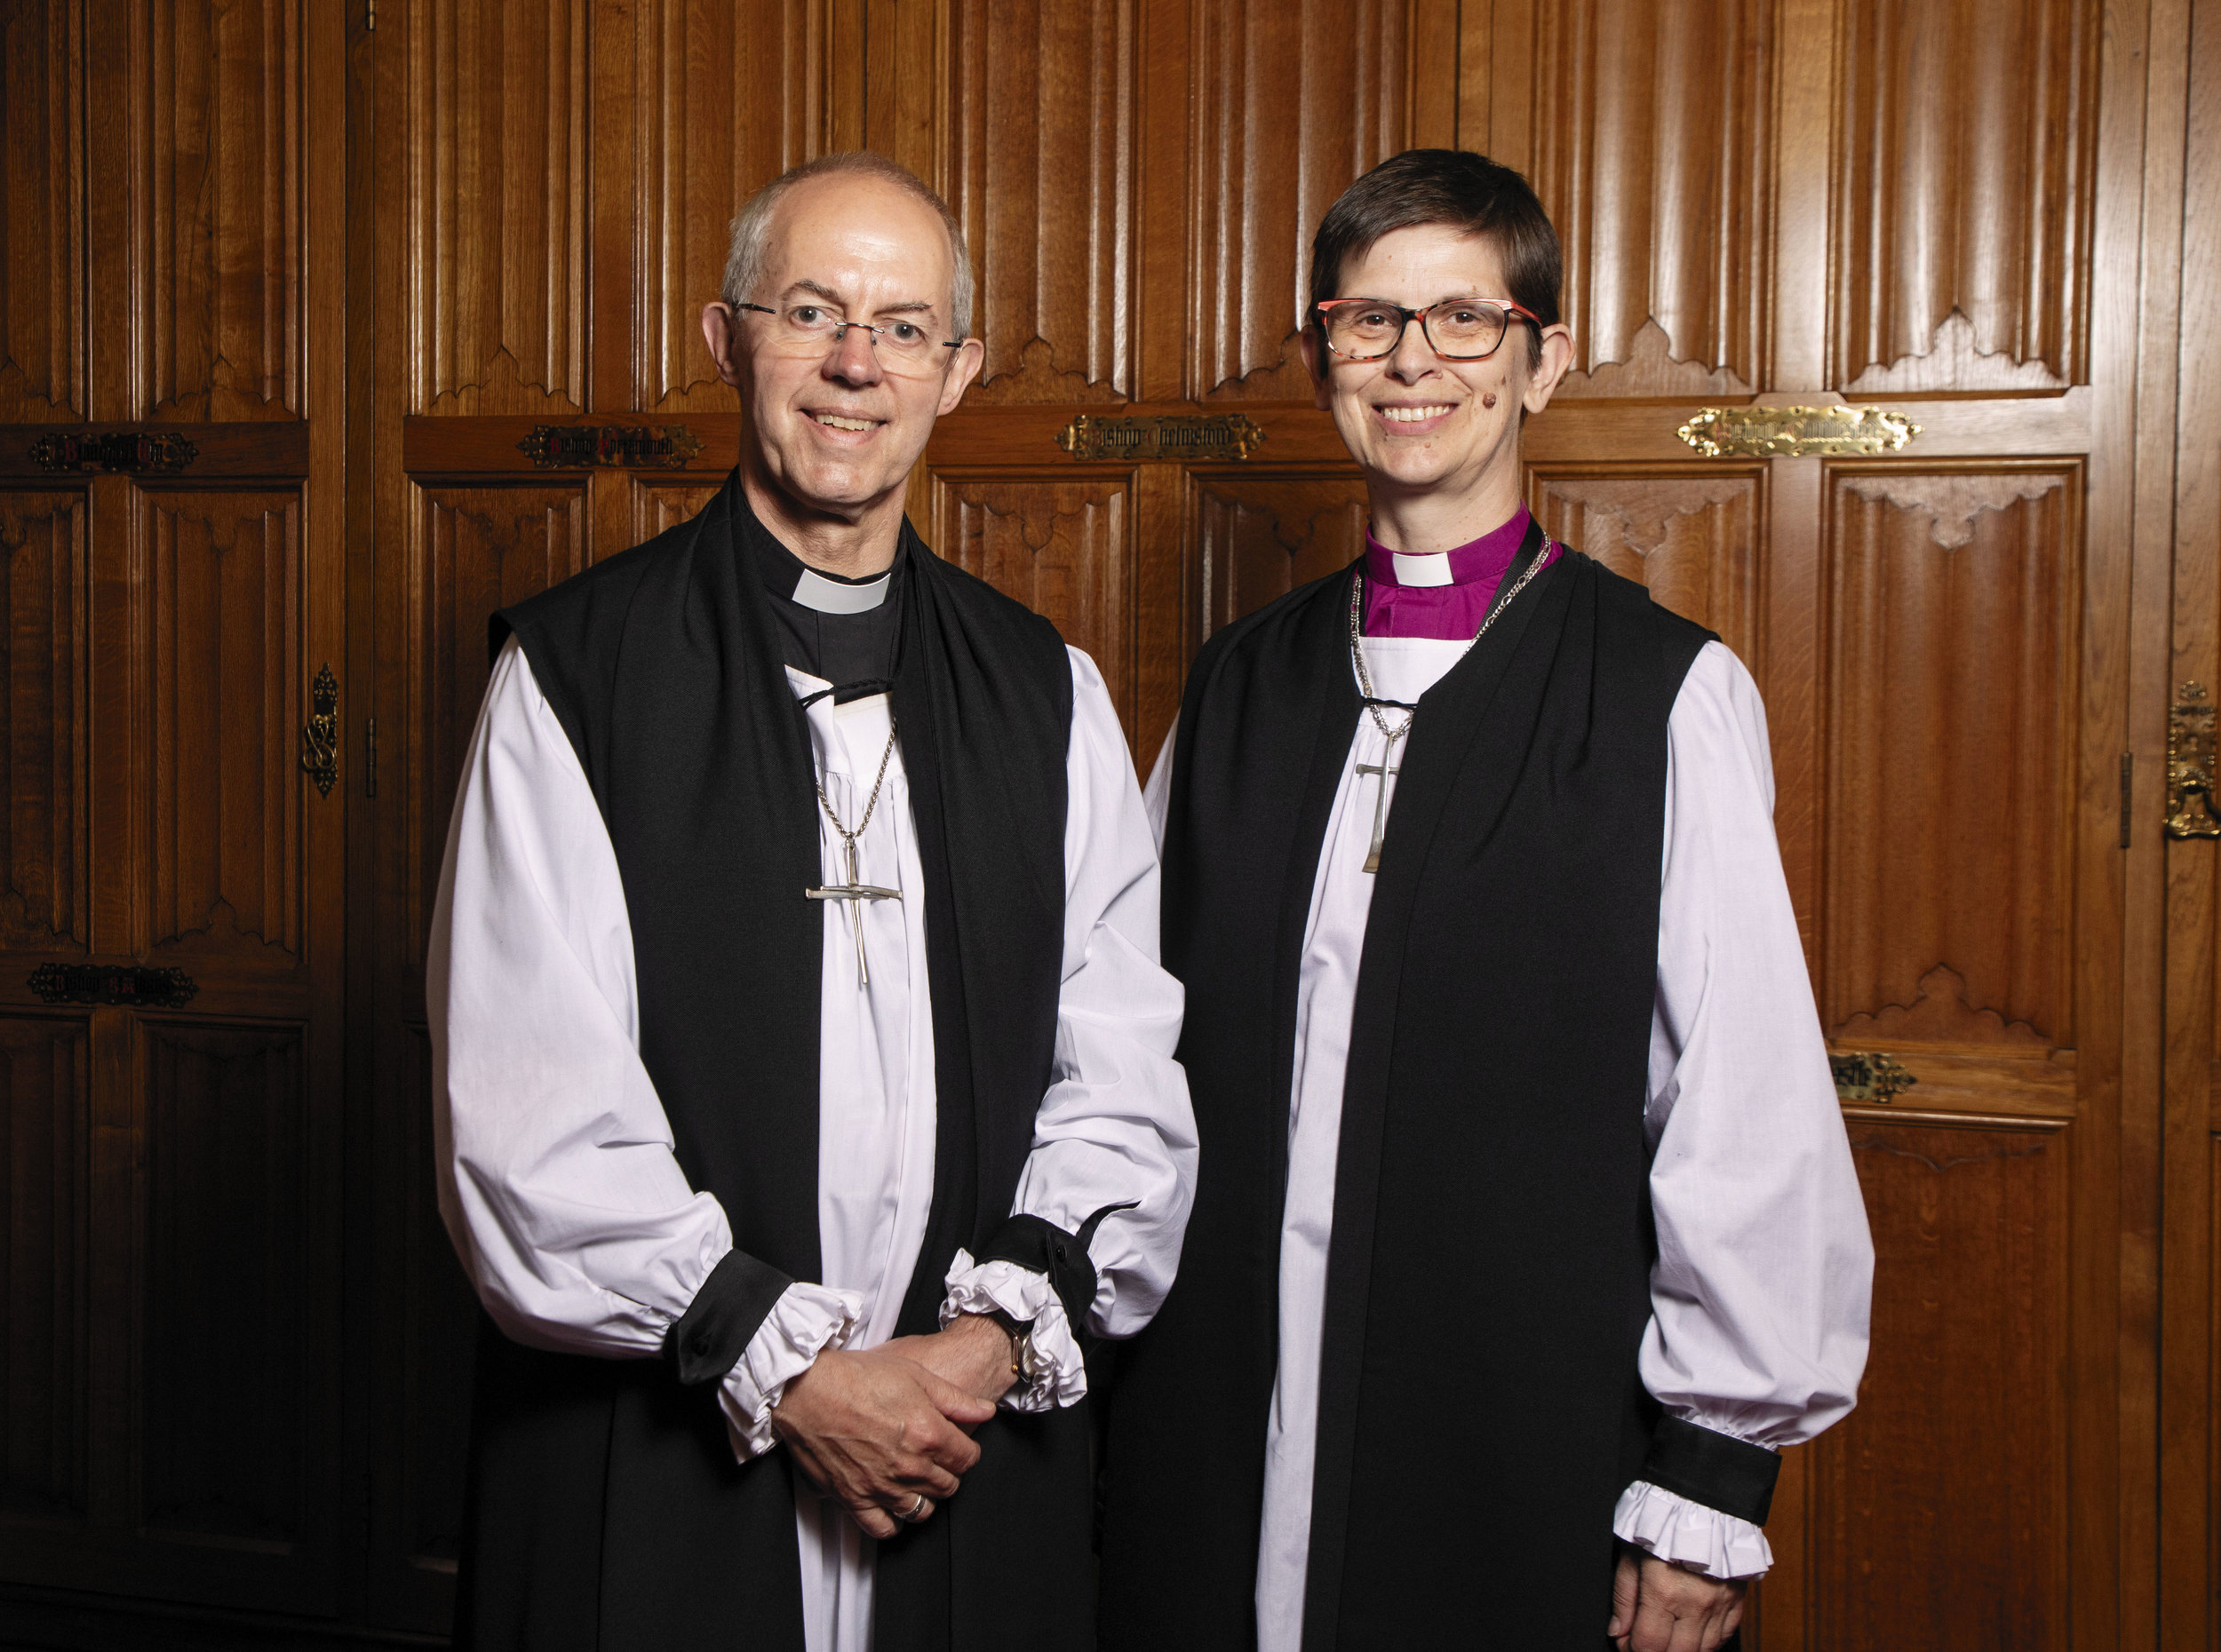 Justin Welby The Archbishop of Canterbury and Libby Lane, Bishop of Derby